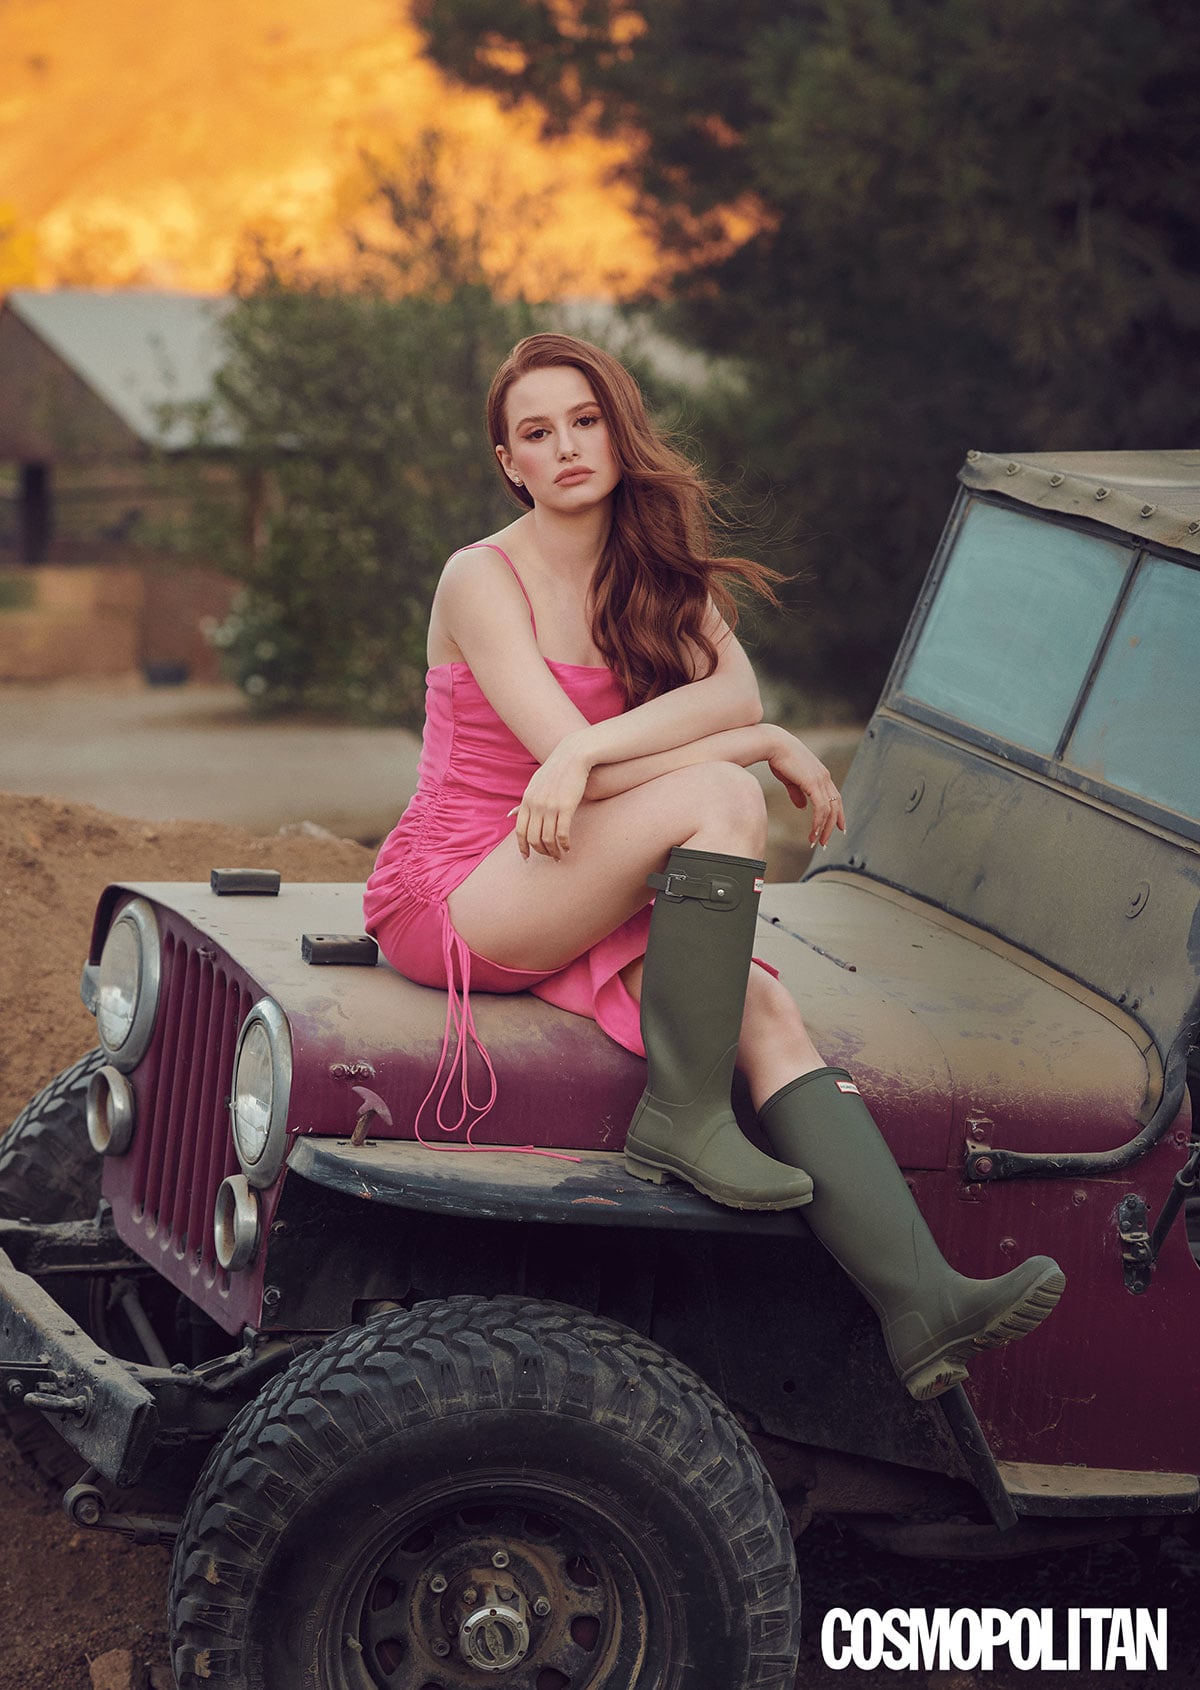 Madelaine Petsch's Sexy Feet, Legs and Minimalist Rose Gold Jewelry